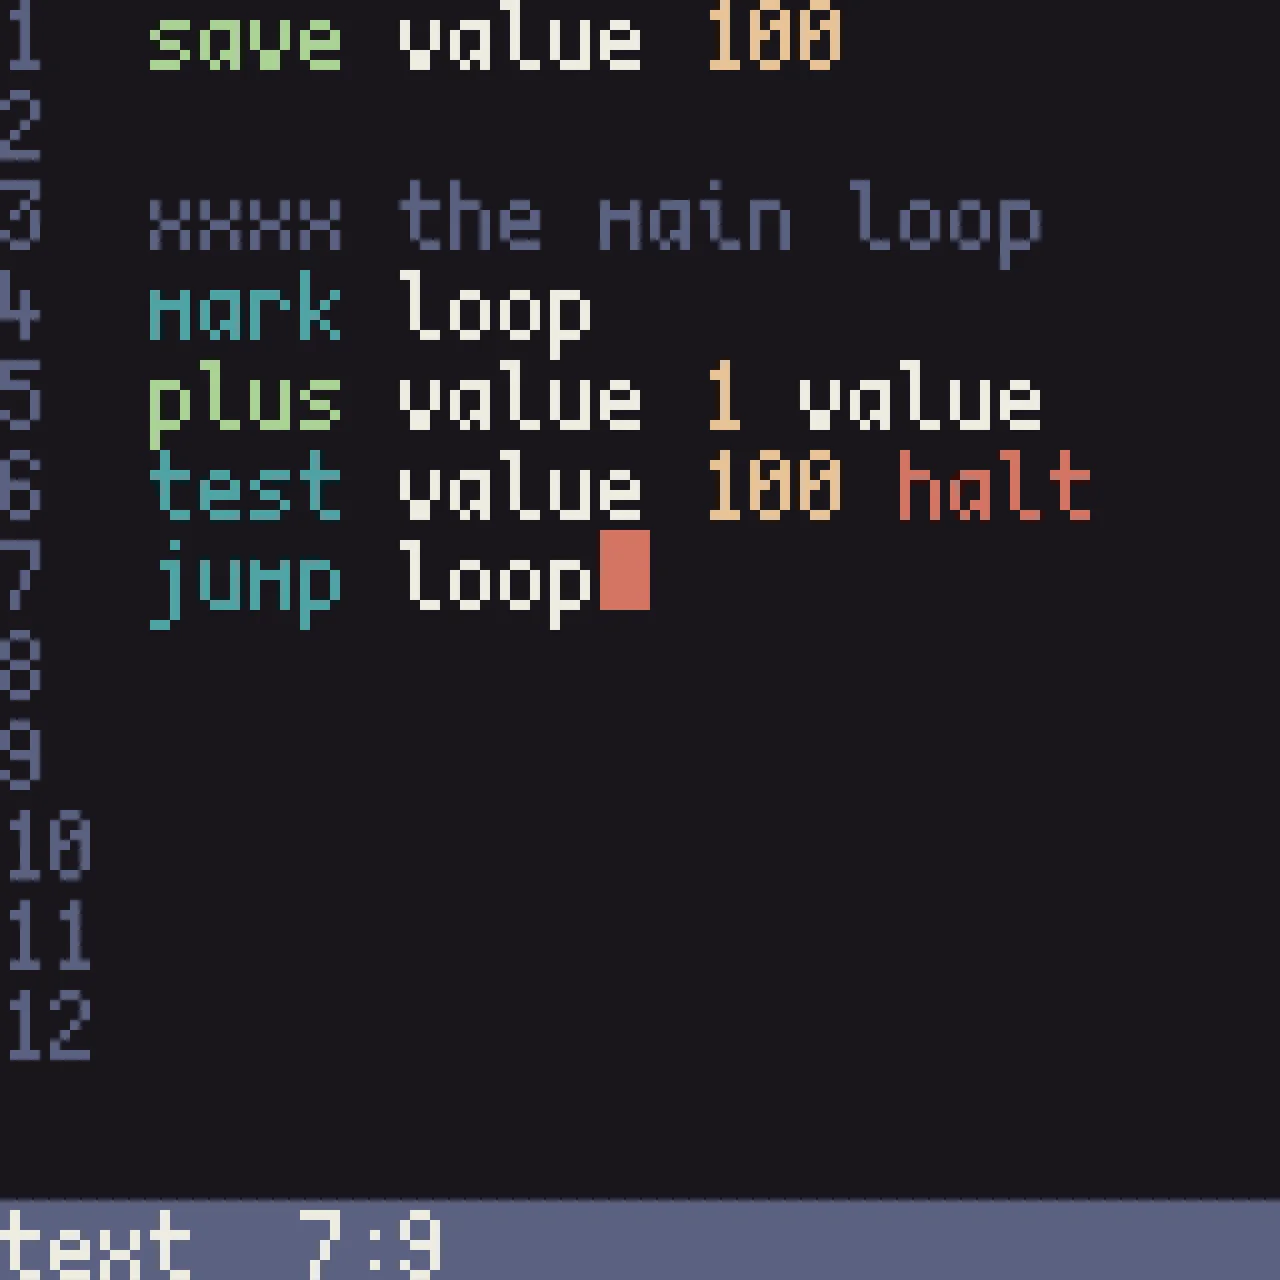 A screenshot of the Stanley's built-in text editor, with colourful syntax highlighting, line numbers and a Vim-style status bar at the bottom of the screen. A simple looping program made of a few lines has been typed in.